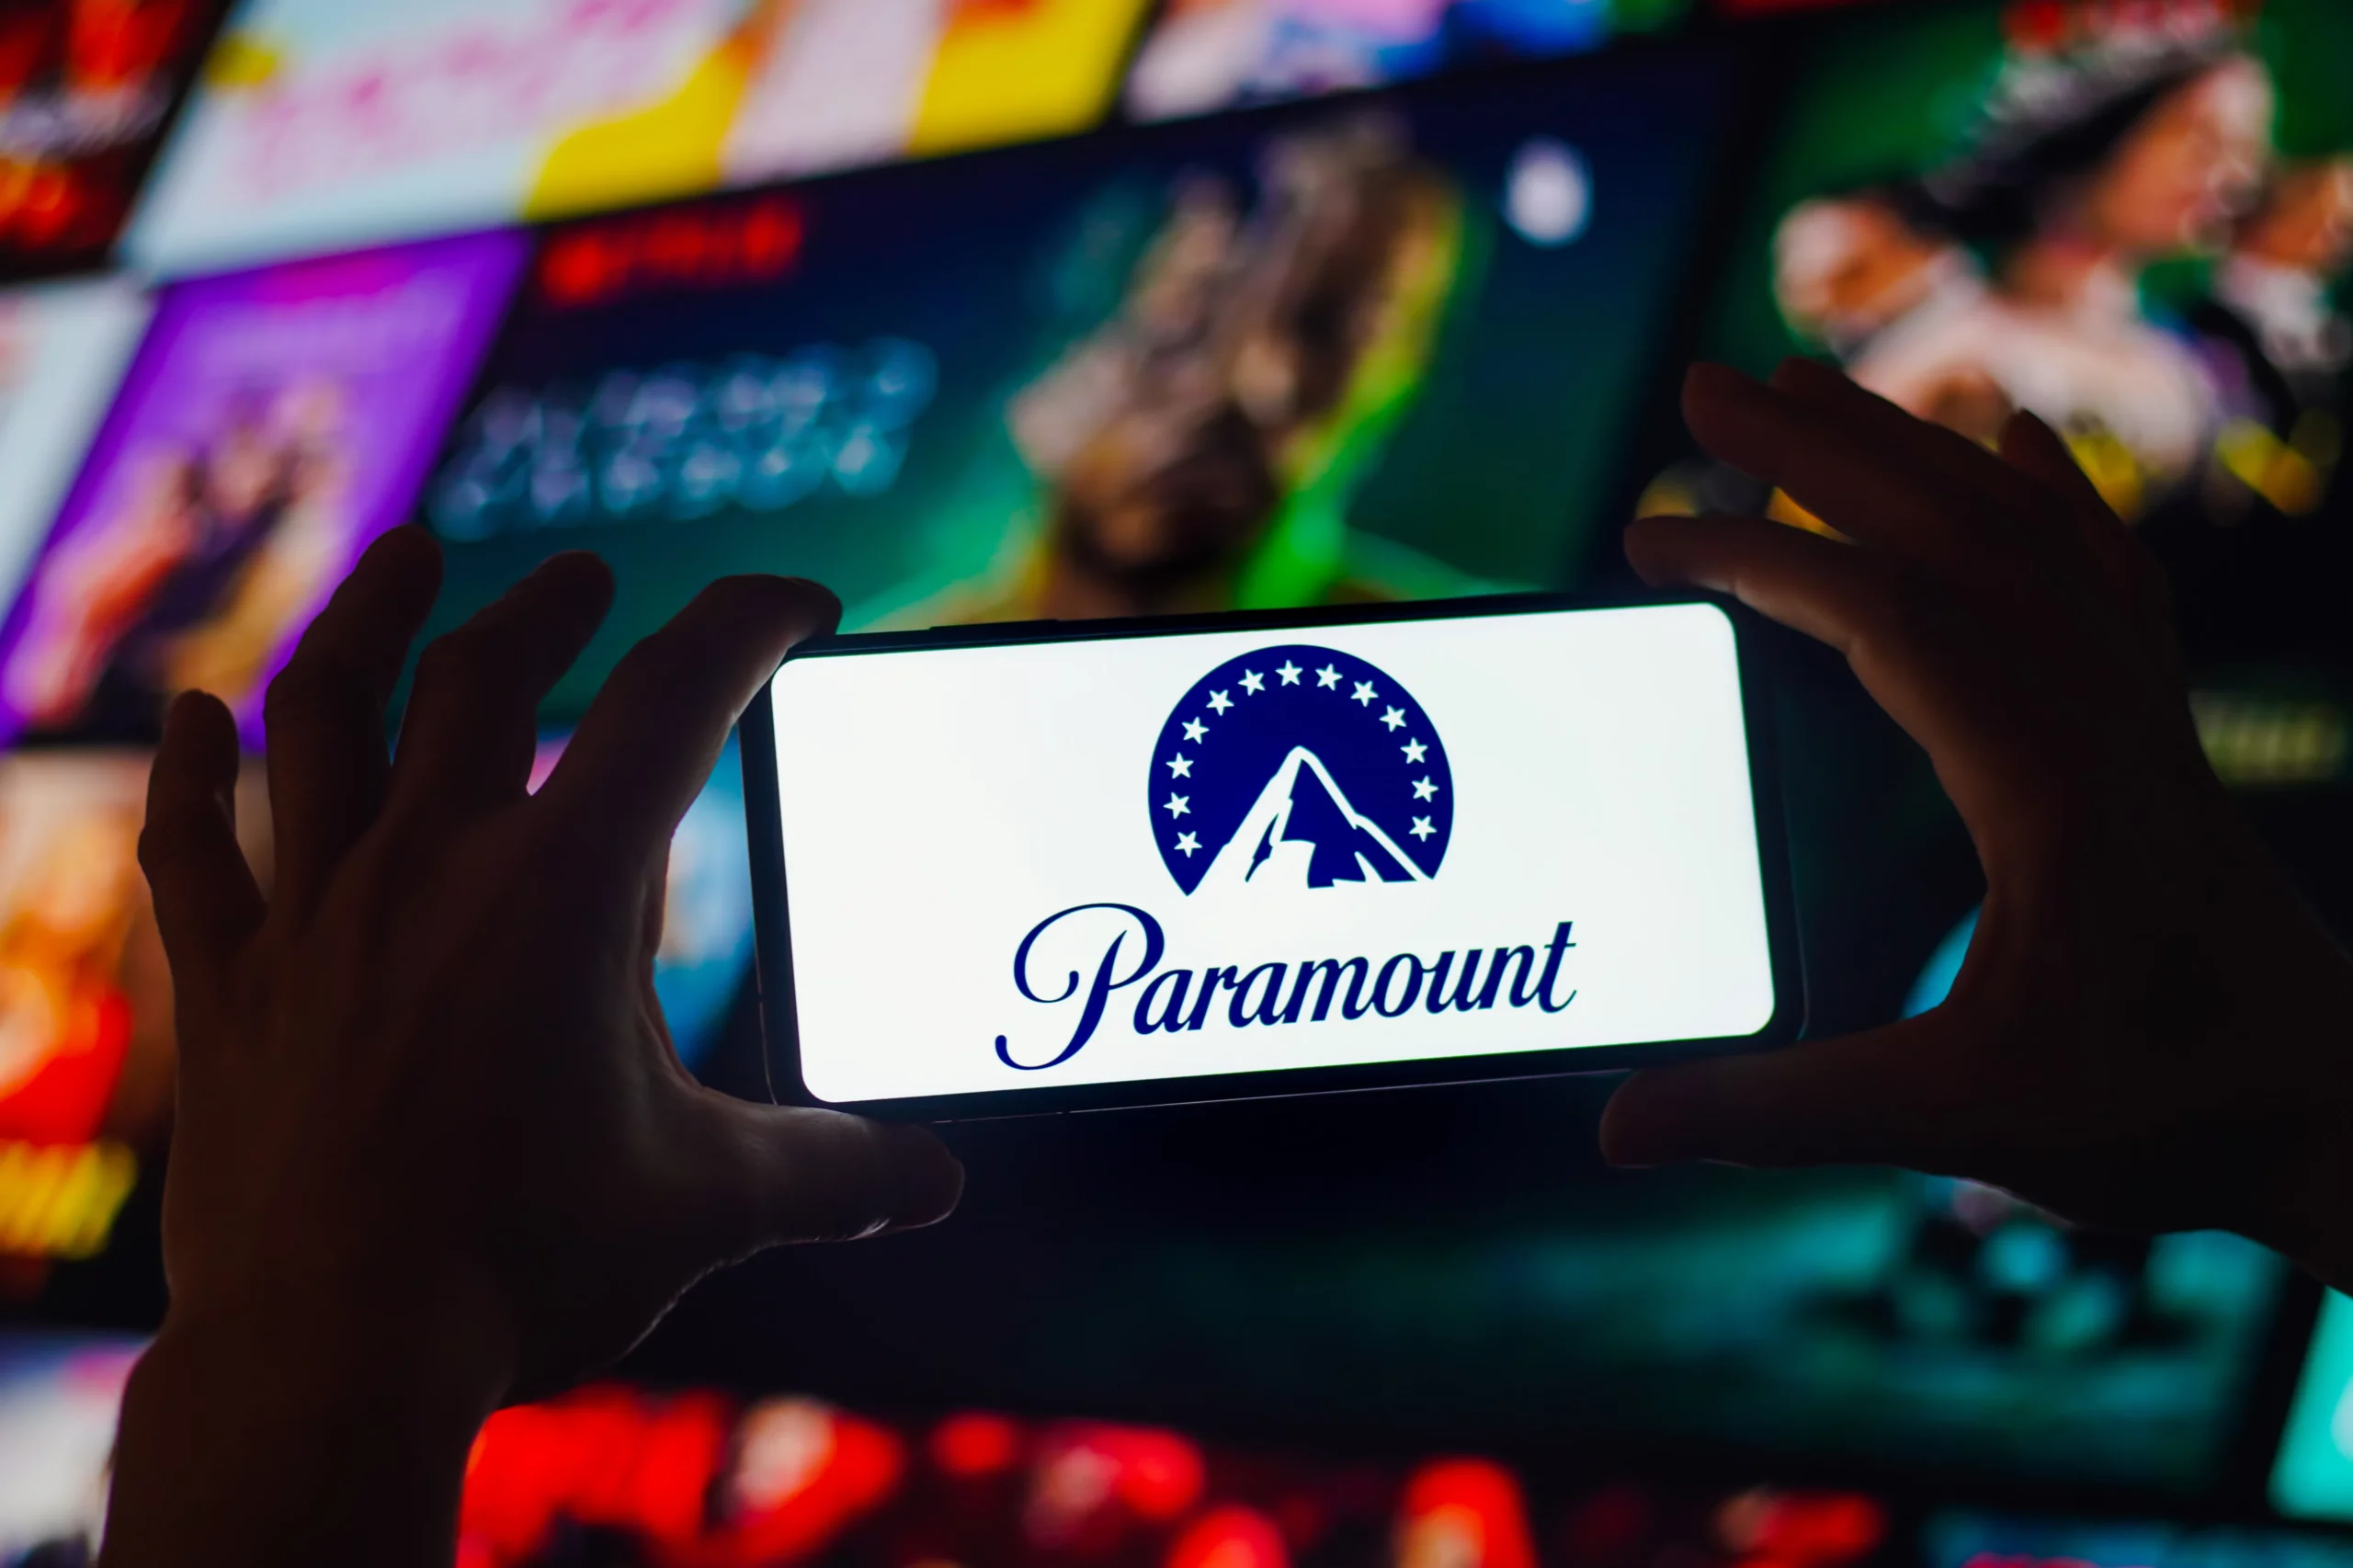 Paramount Global Projects Profitability for Paramount+ by 2025 Amid Streaming Growth